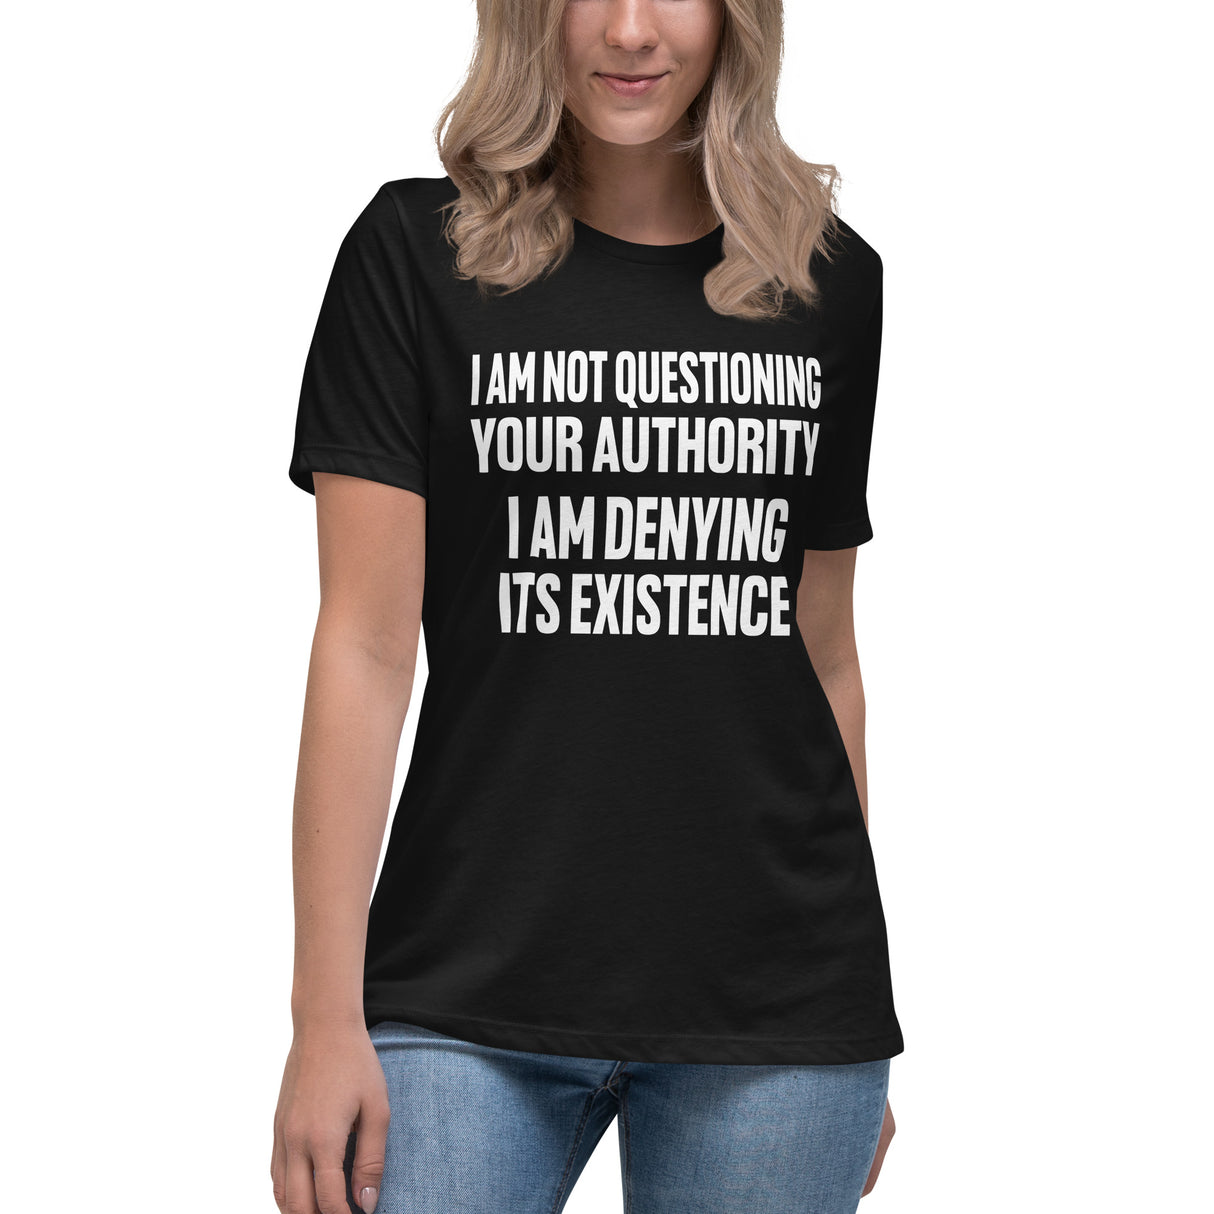 I Deny Your Authority Women's Shirt by Libertarian Country